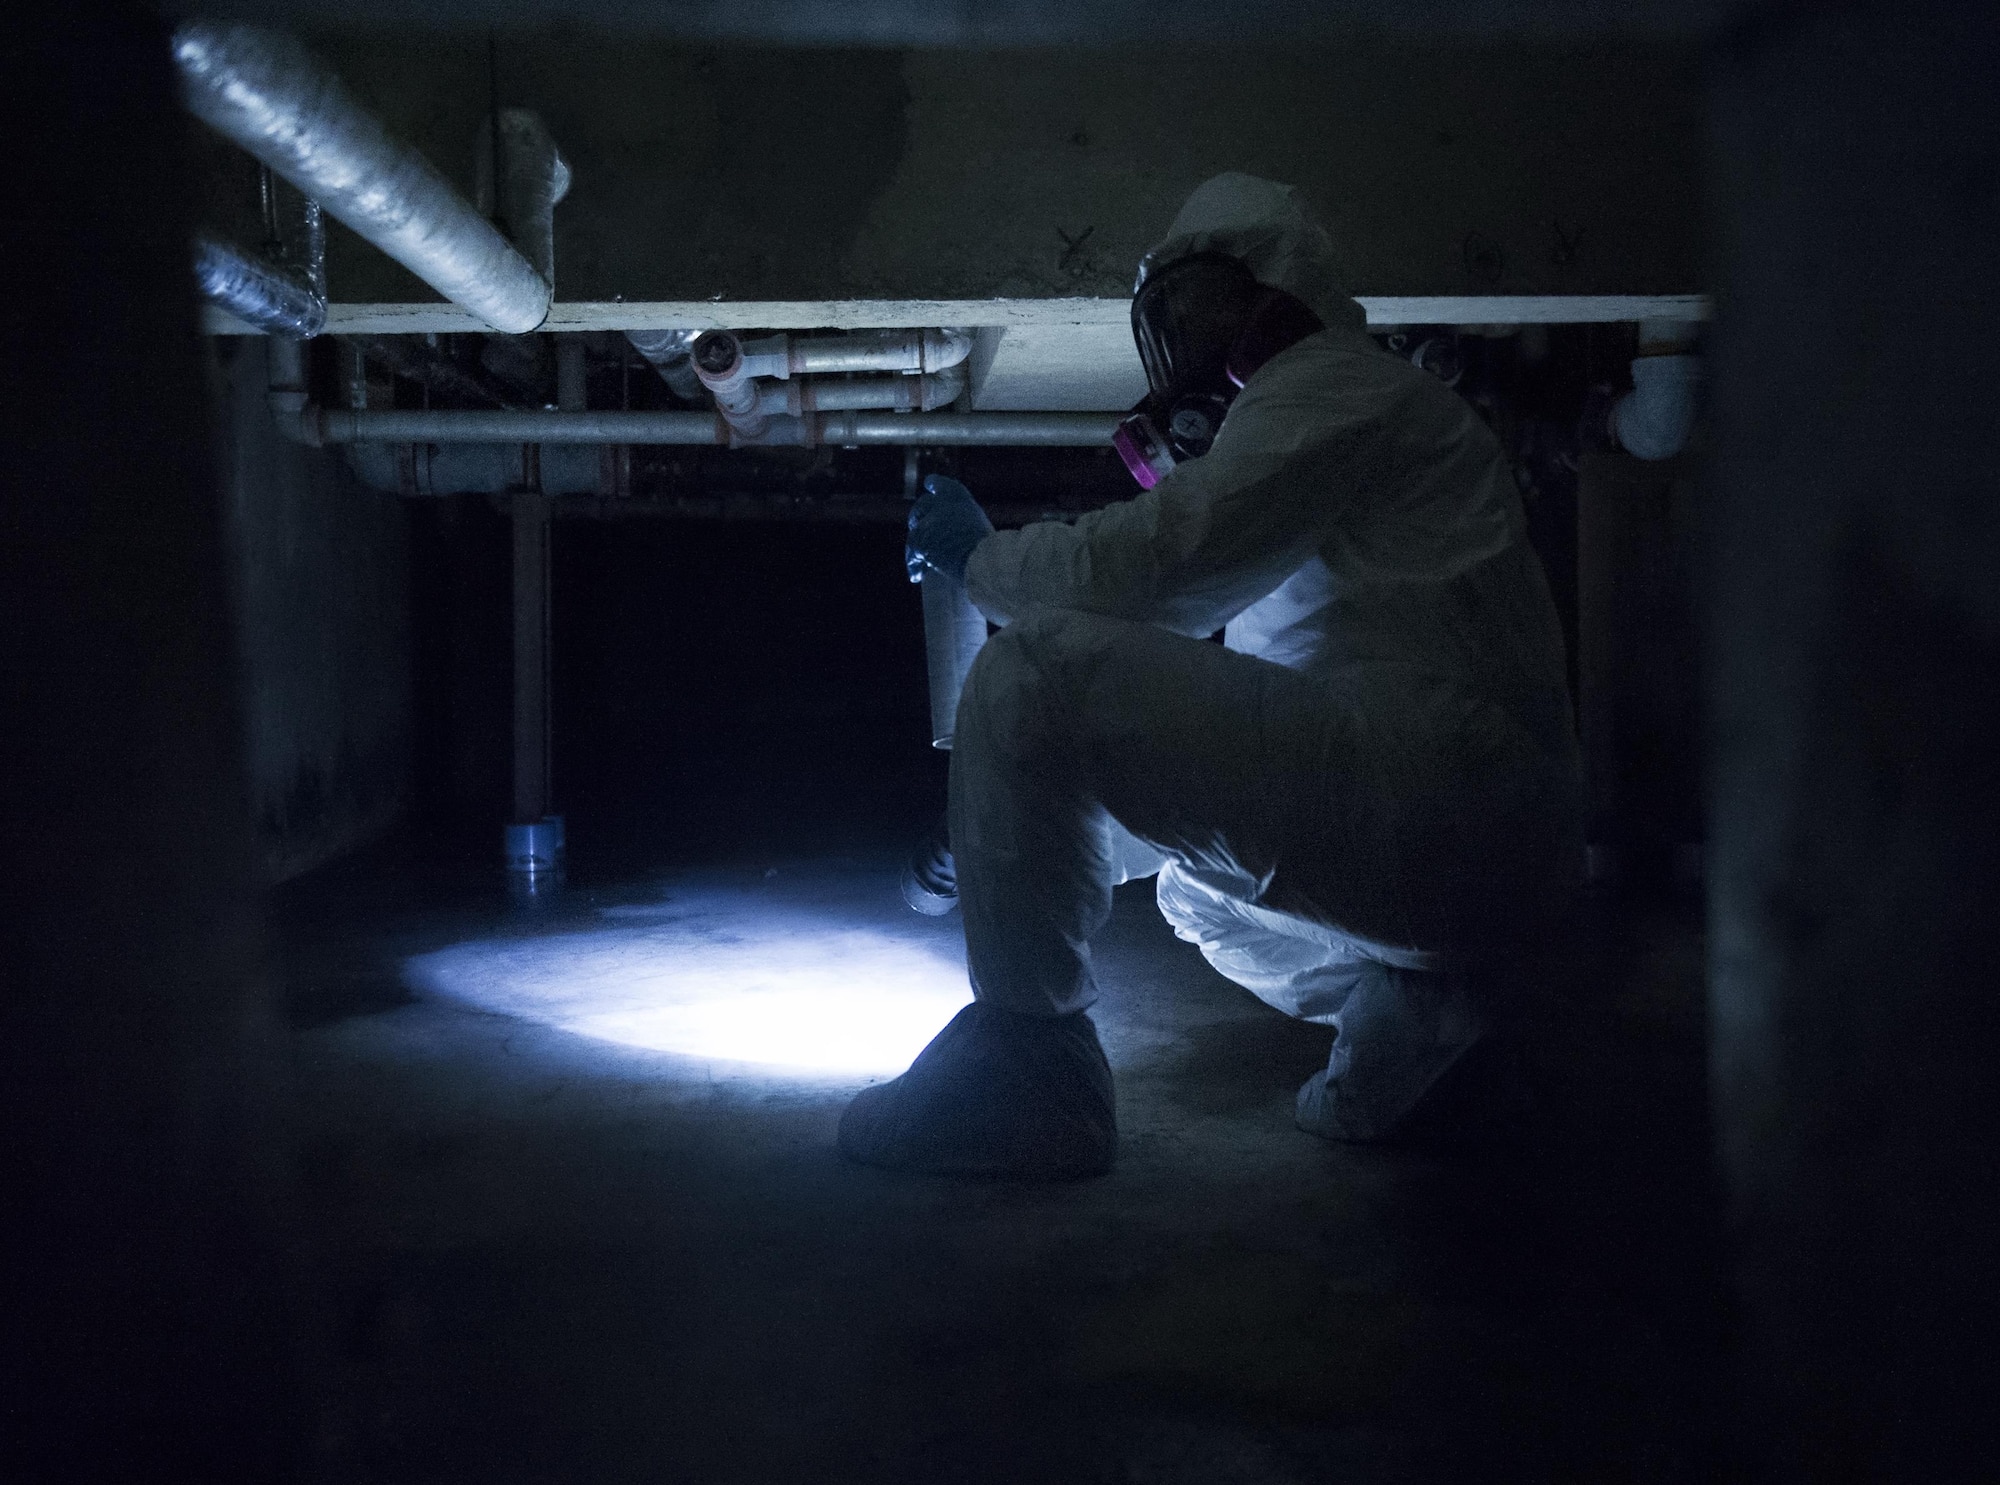 Staff Sgt. Brandon Cenarrusa, a 374th Civil Engineer Squadron pest management craftsman, inspects the crawlspace at Yokota Air Base, Japan, Jan. 6, 2016. To ensure that facilities on Yokota AB remain pest free, entomology Airmen identify and repair any infrastructure imperfections that may lead to pest. (U.S. Air Force photo/Airman 1st Class Delano Scott)